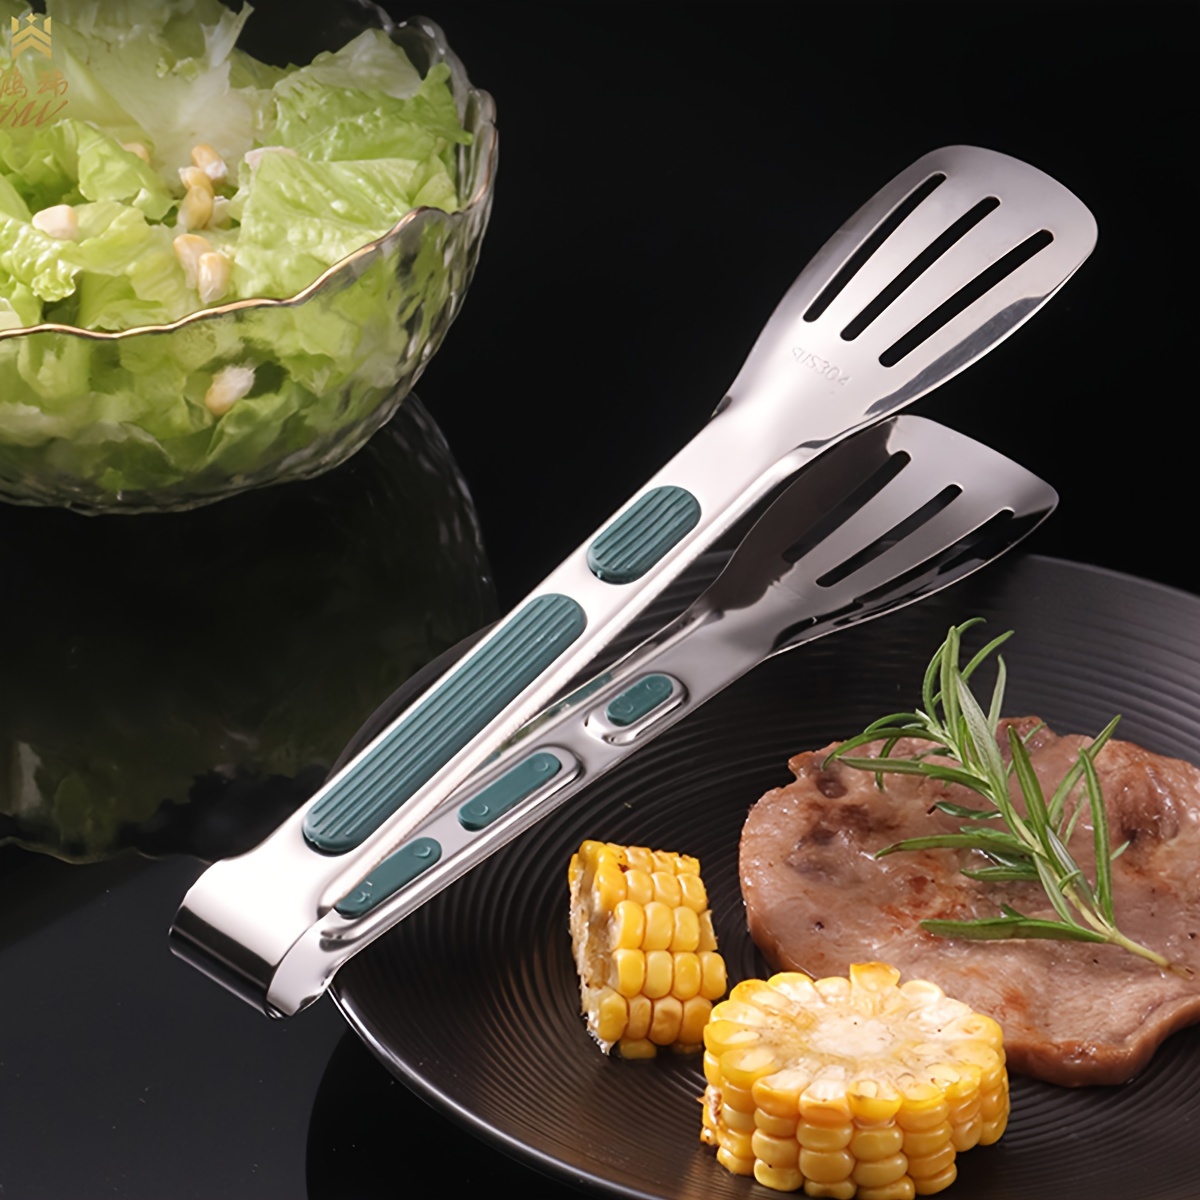 1pc Stainless Steel Non-Slip Steak & Fried Fish Clamp For